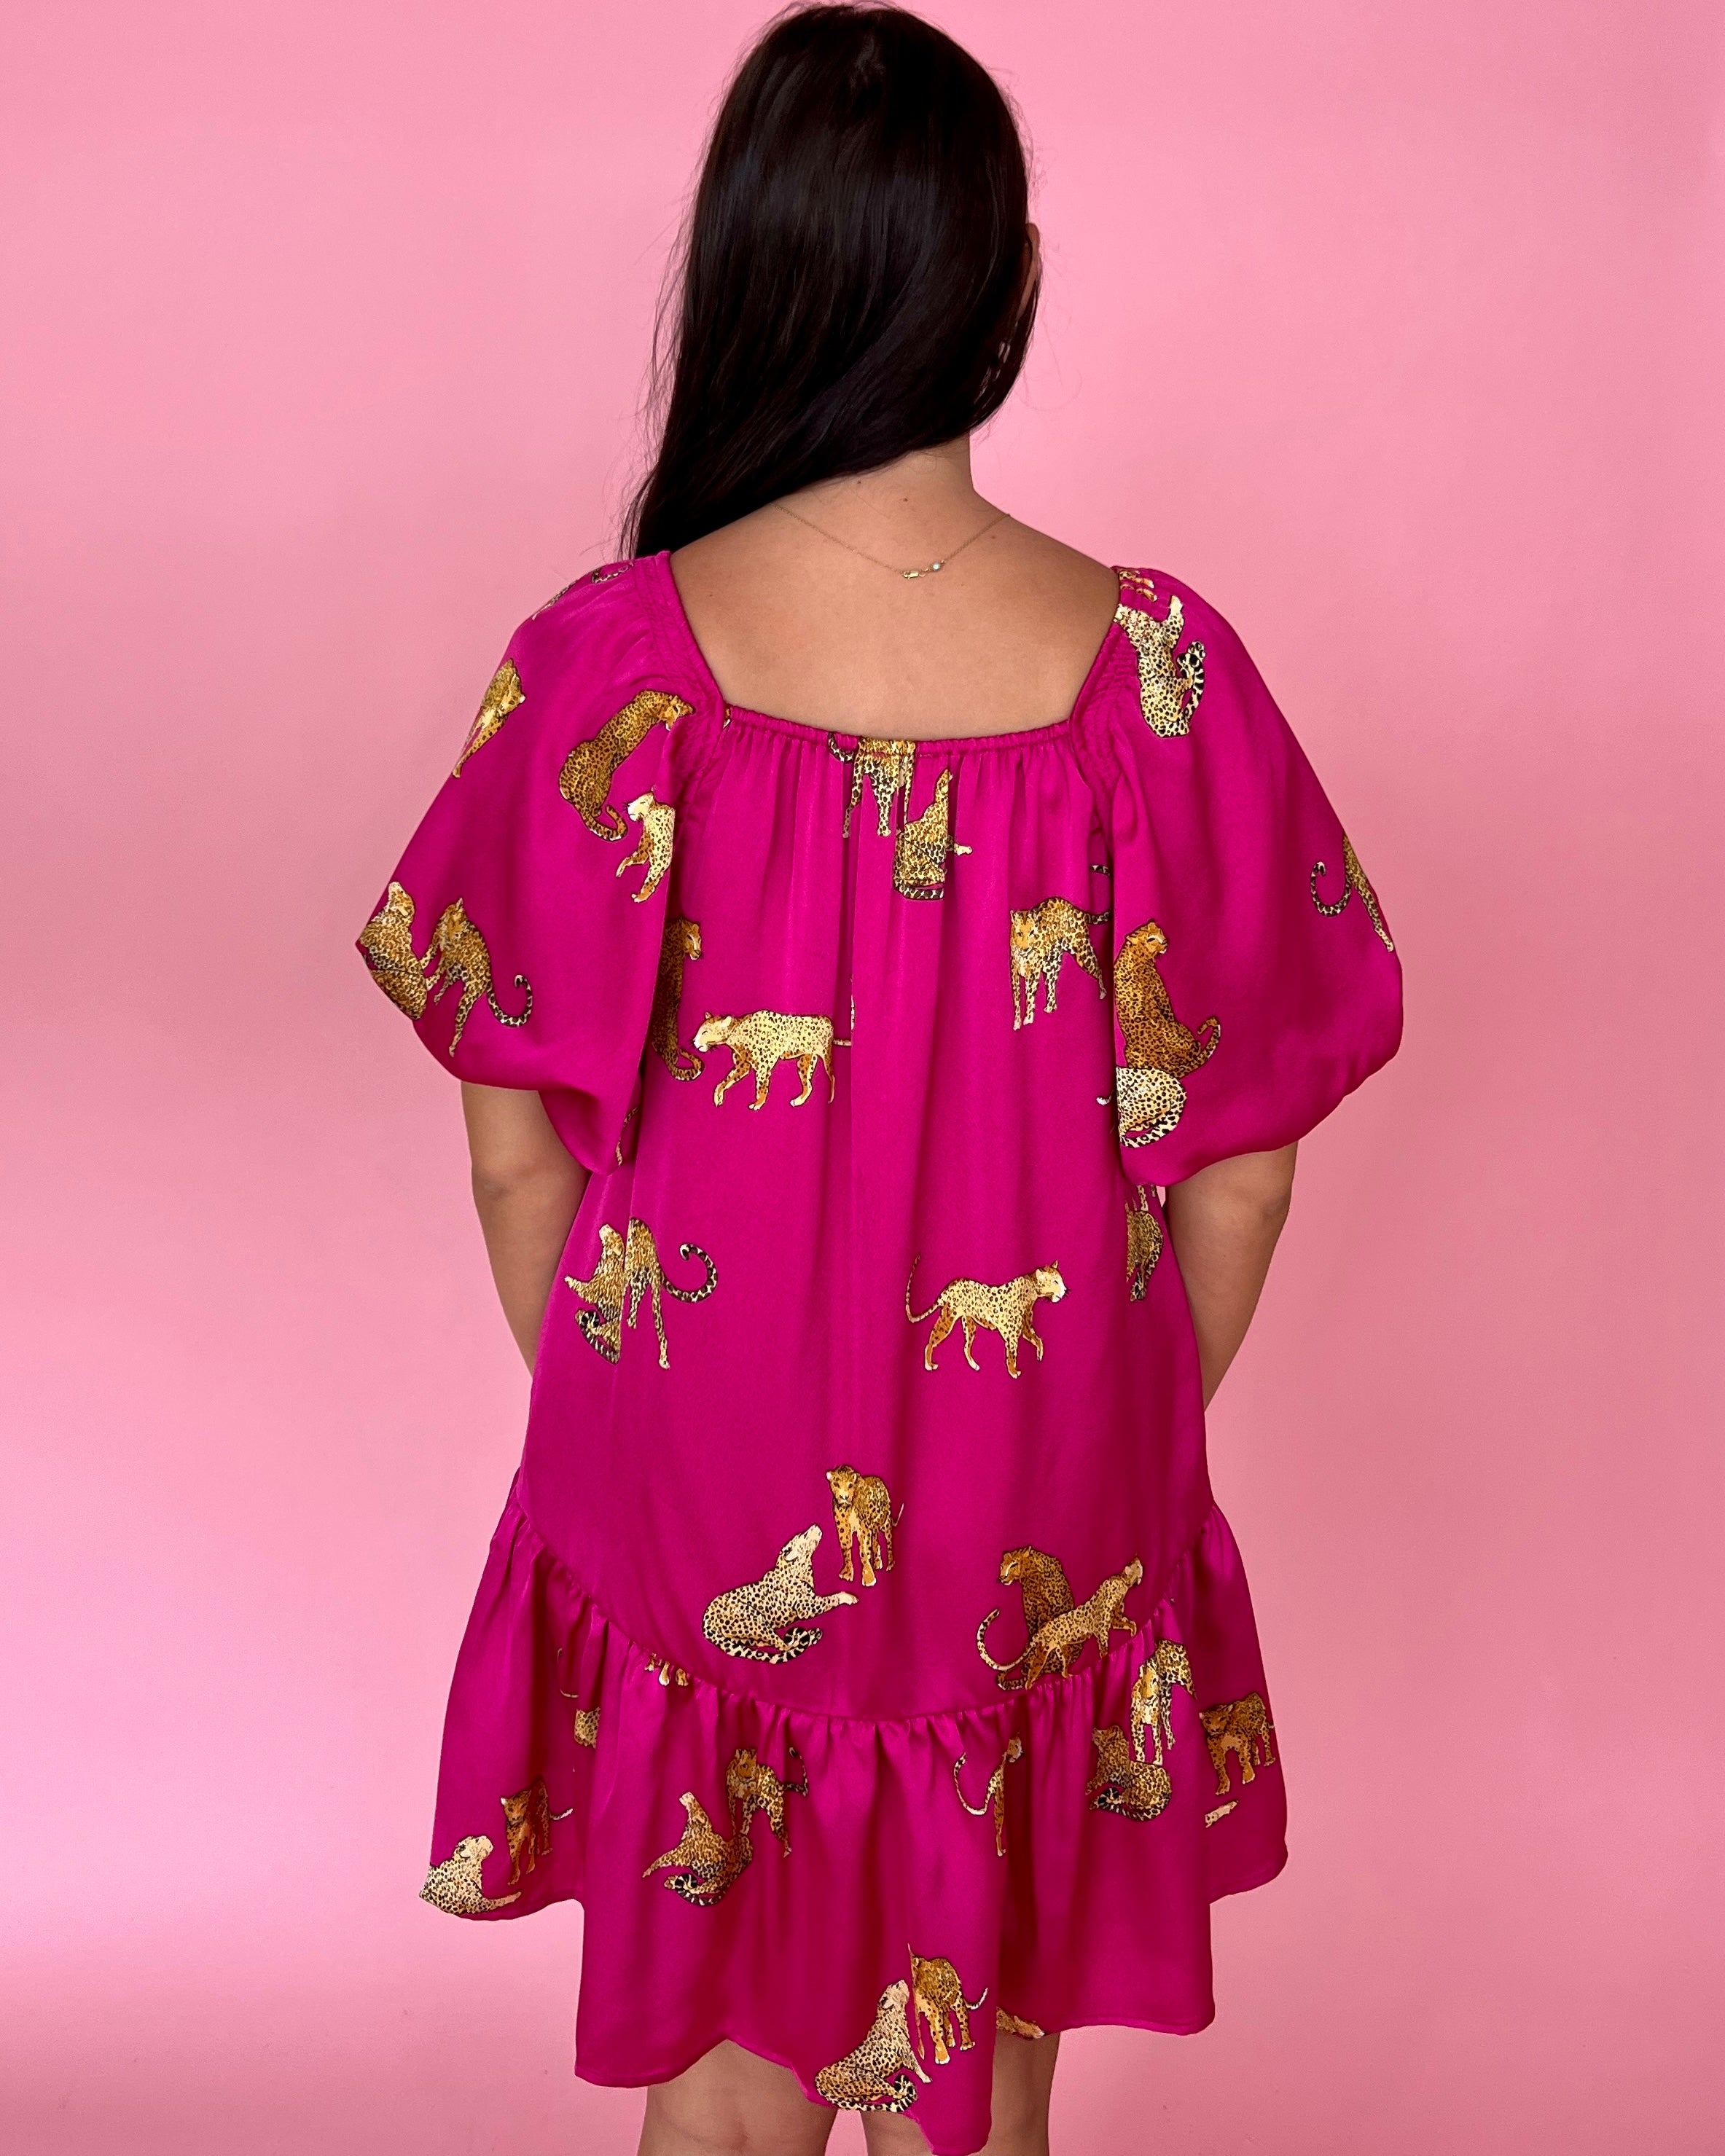 Another Day Ahead Plum Leopard Satin Puff Sleeve Dress-Shop-Womens-Boutique-Clothing